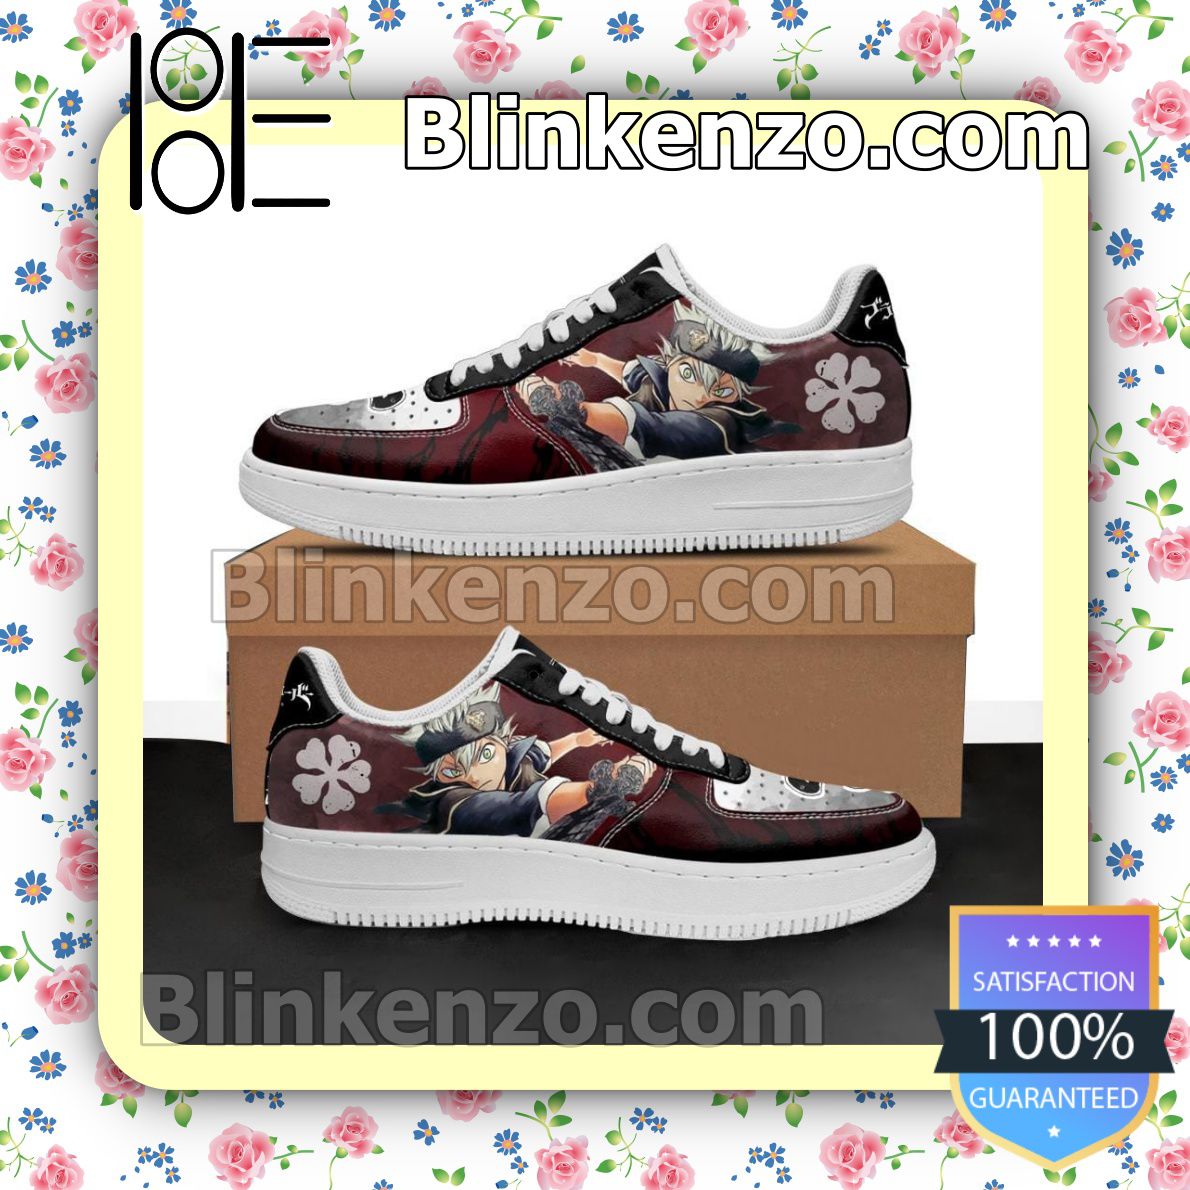 Sale Off Asta Black Bull Knight Black Clover Anime Nike Air Force Sneakers